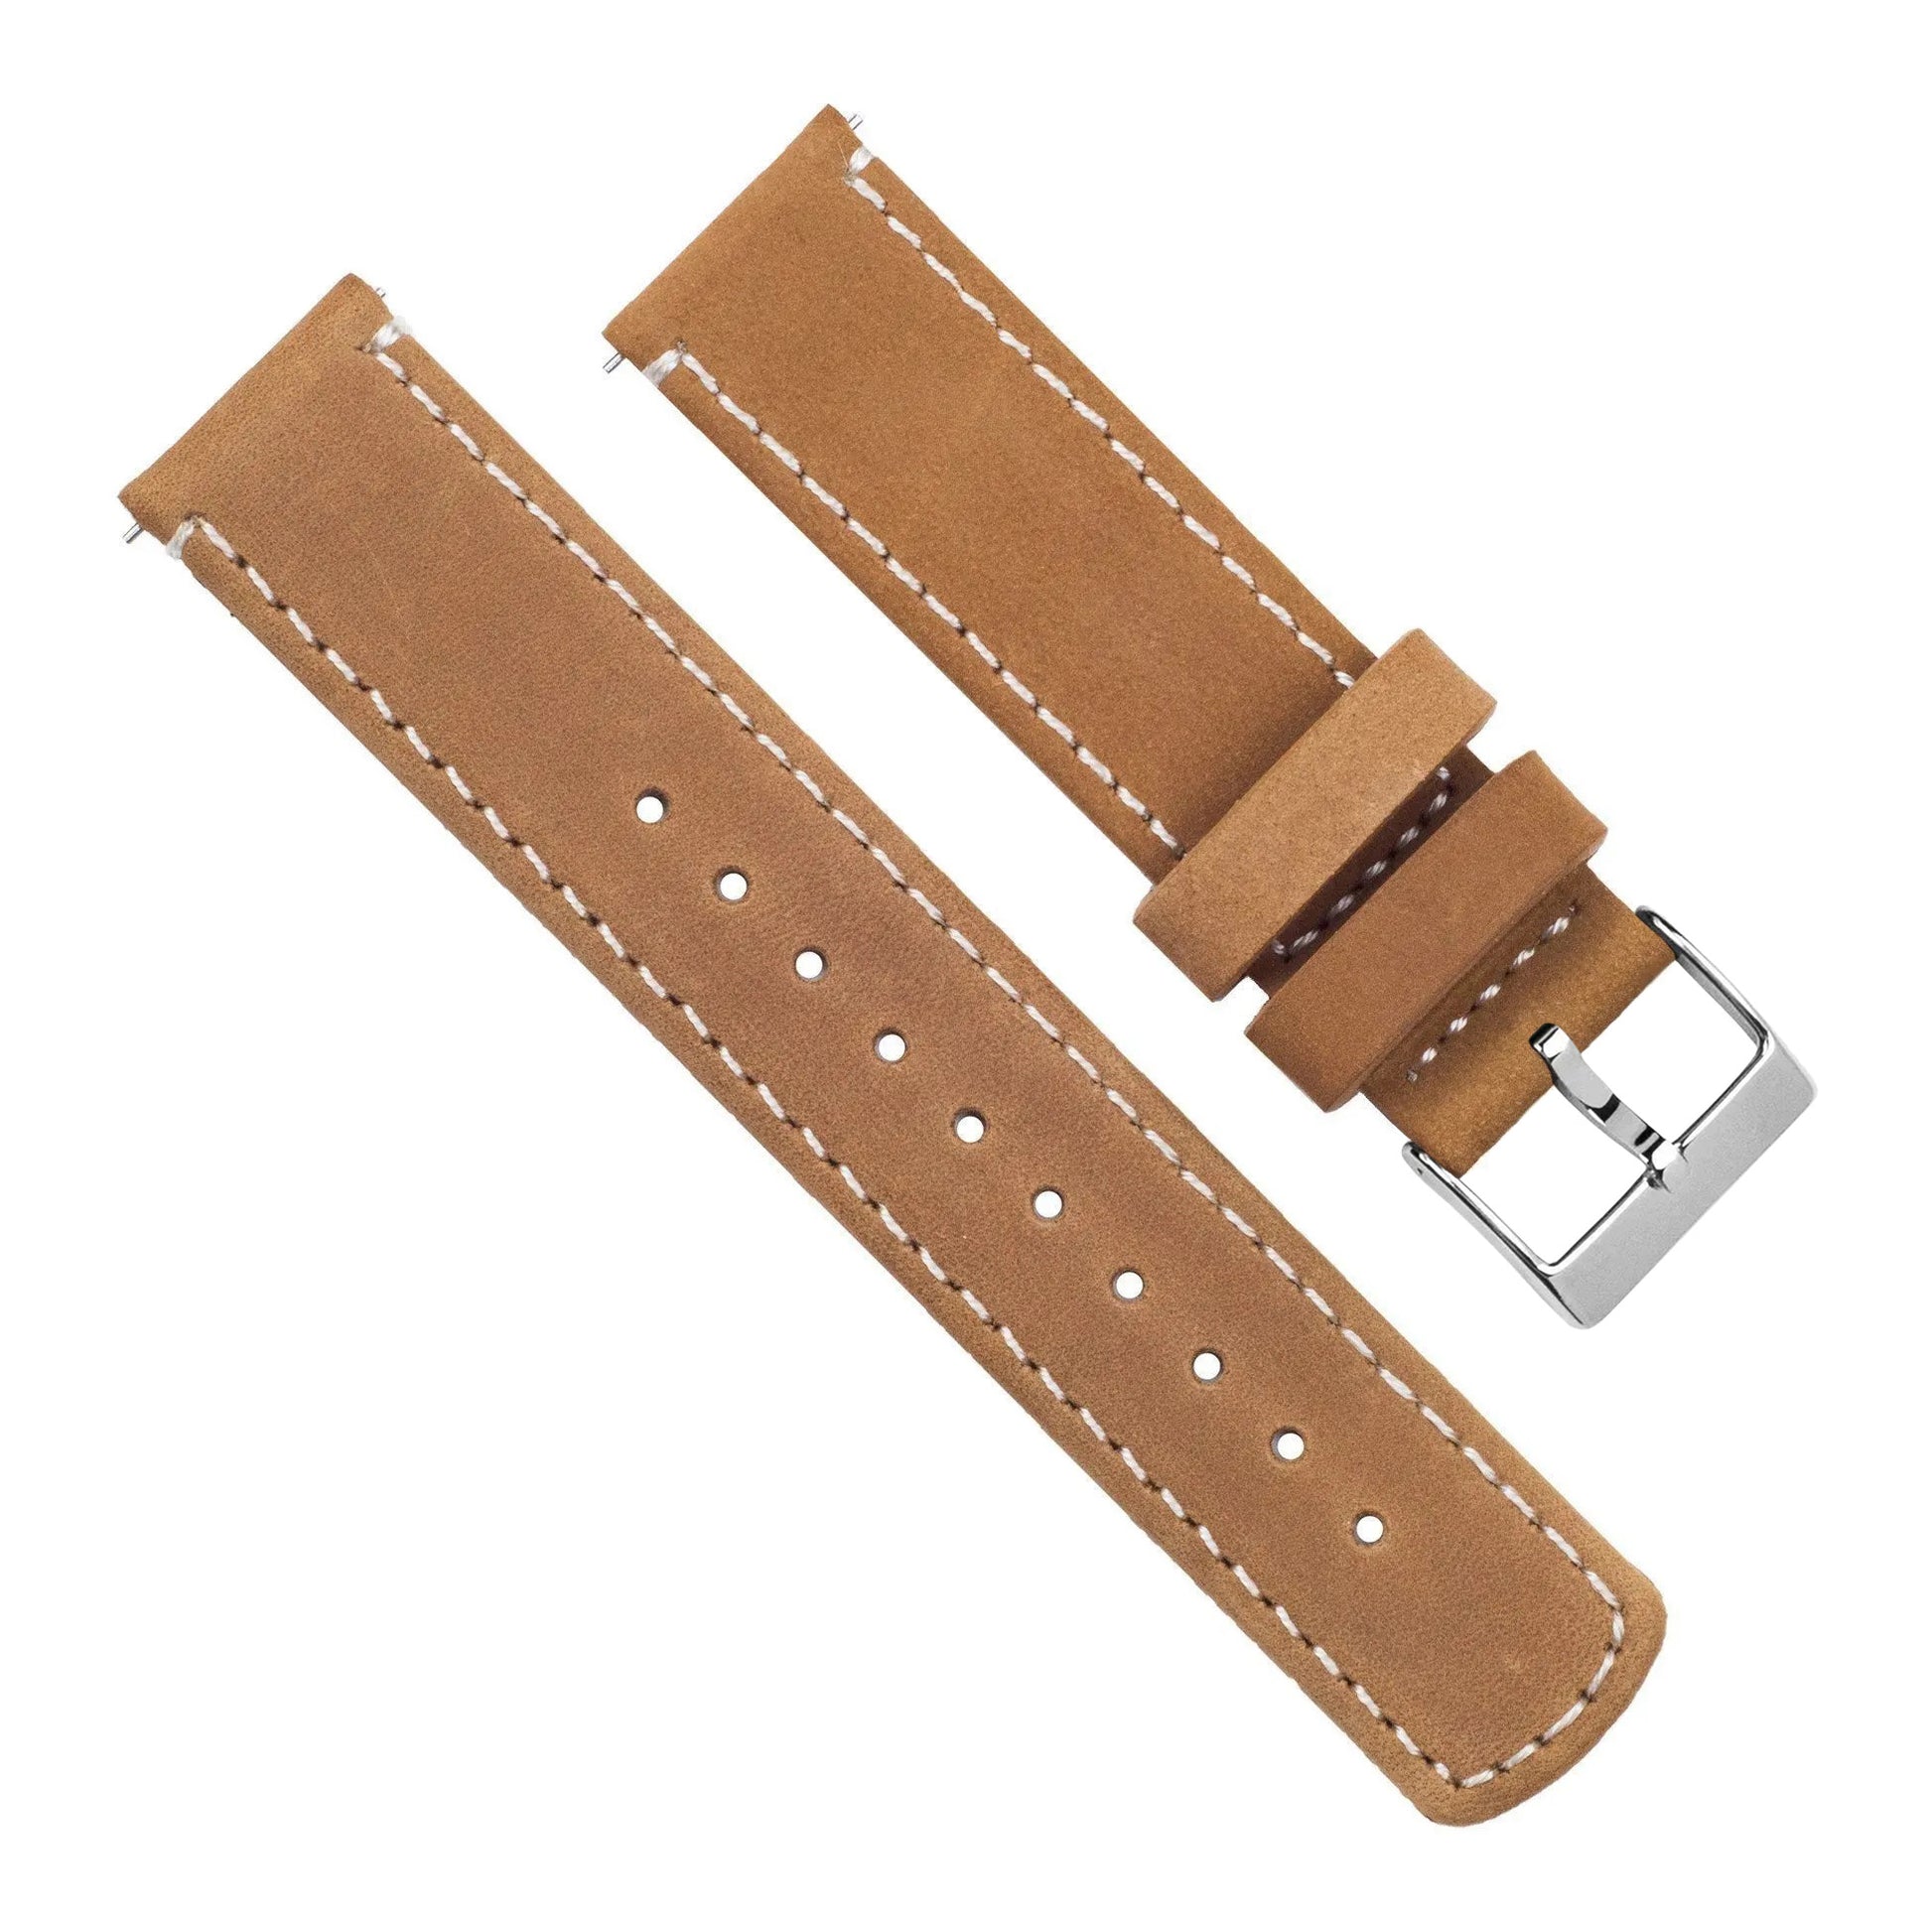 Samsung Galaxy Watch3 | Gingerbread Brown Leather & Linen White Stitching - Barton Watch Bands